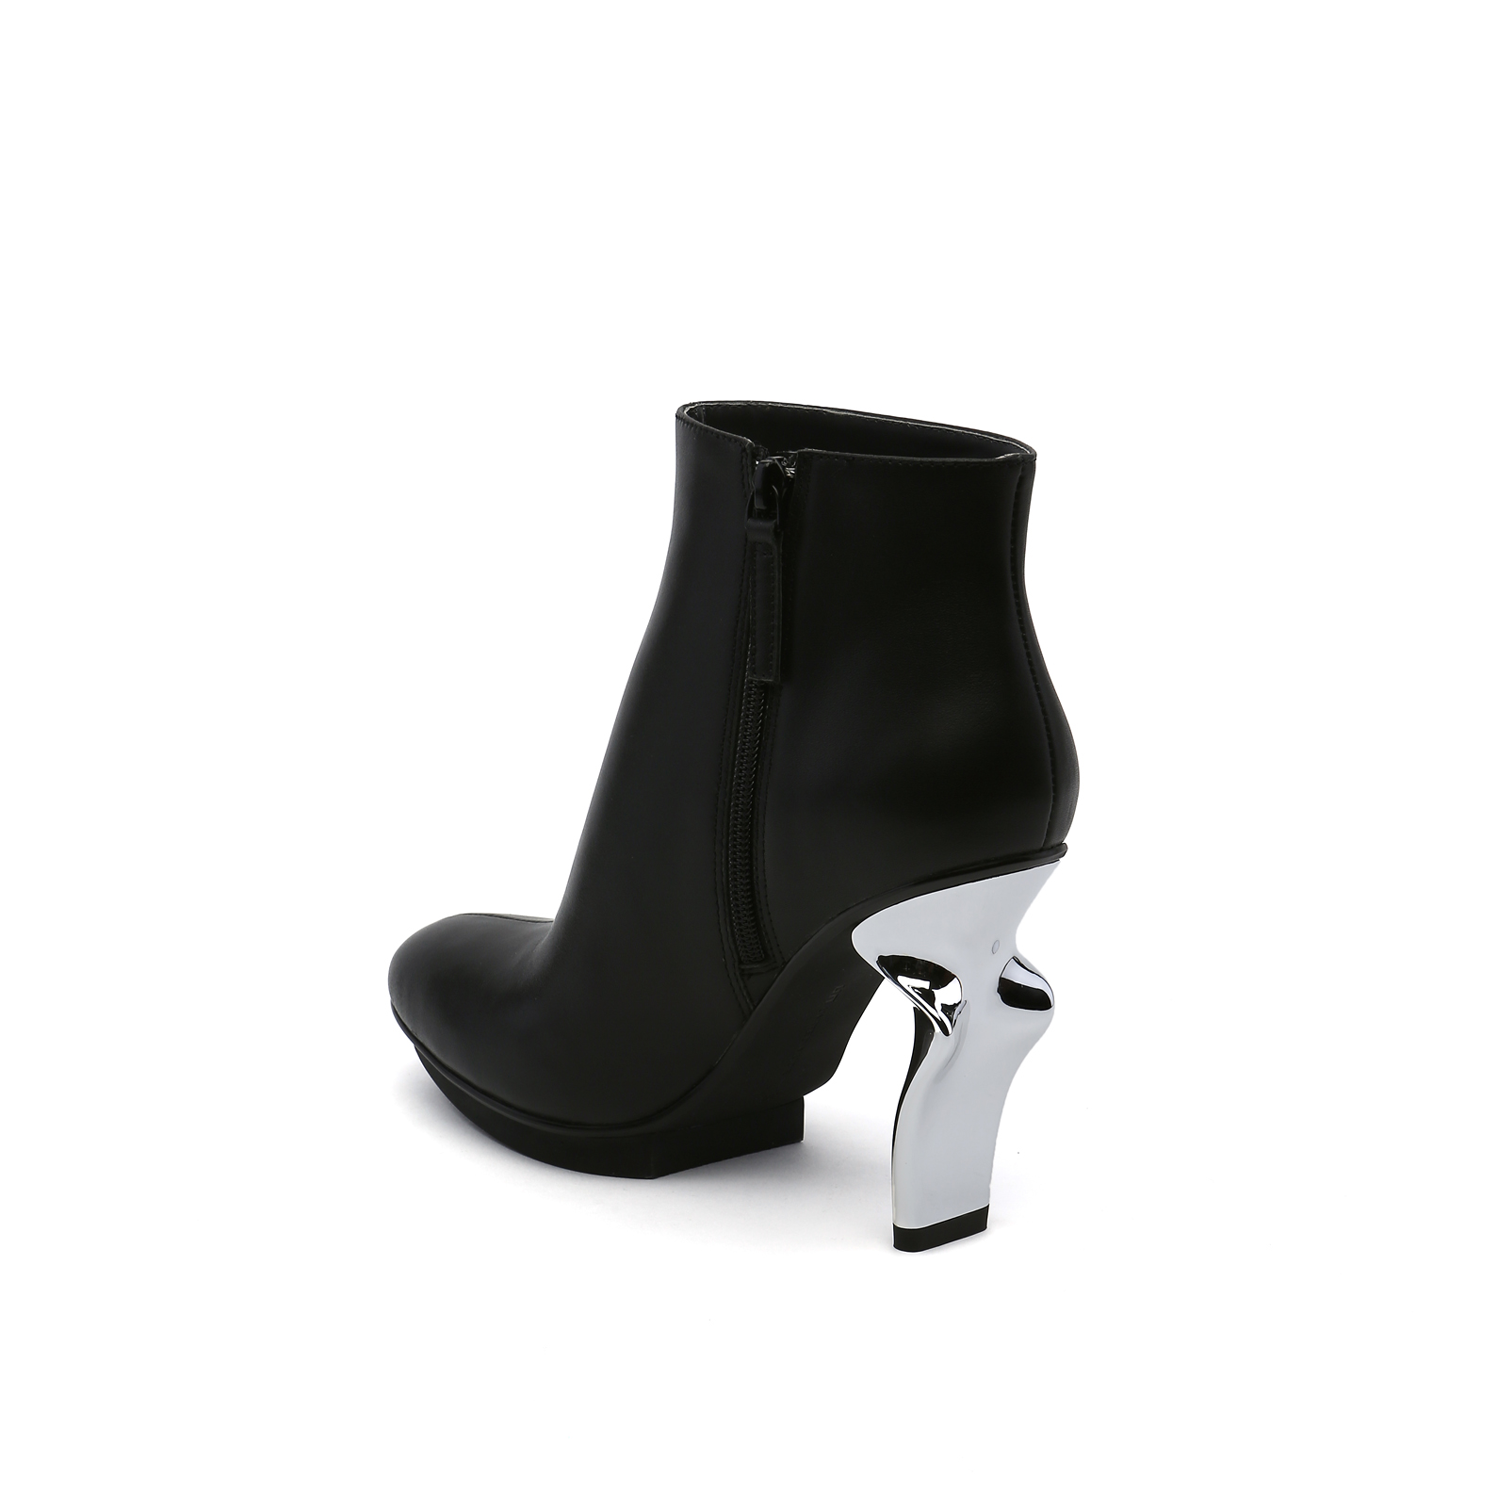 inner back side view of the united nude twirl bootie. This bootie is black with a metallic spiraling high heel and an inner zipper.